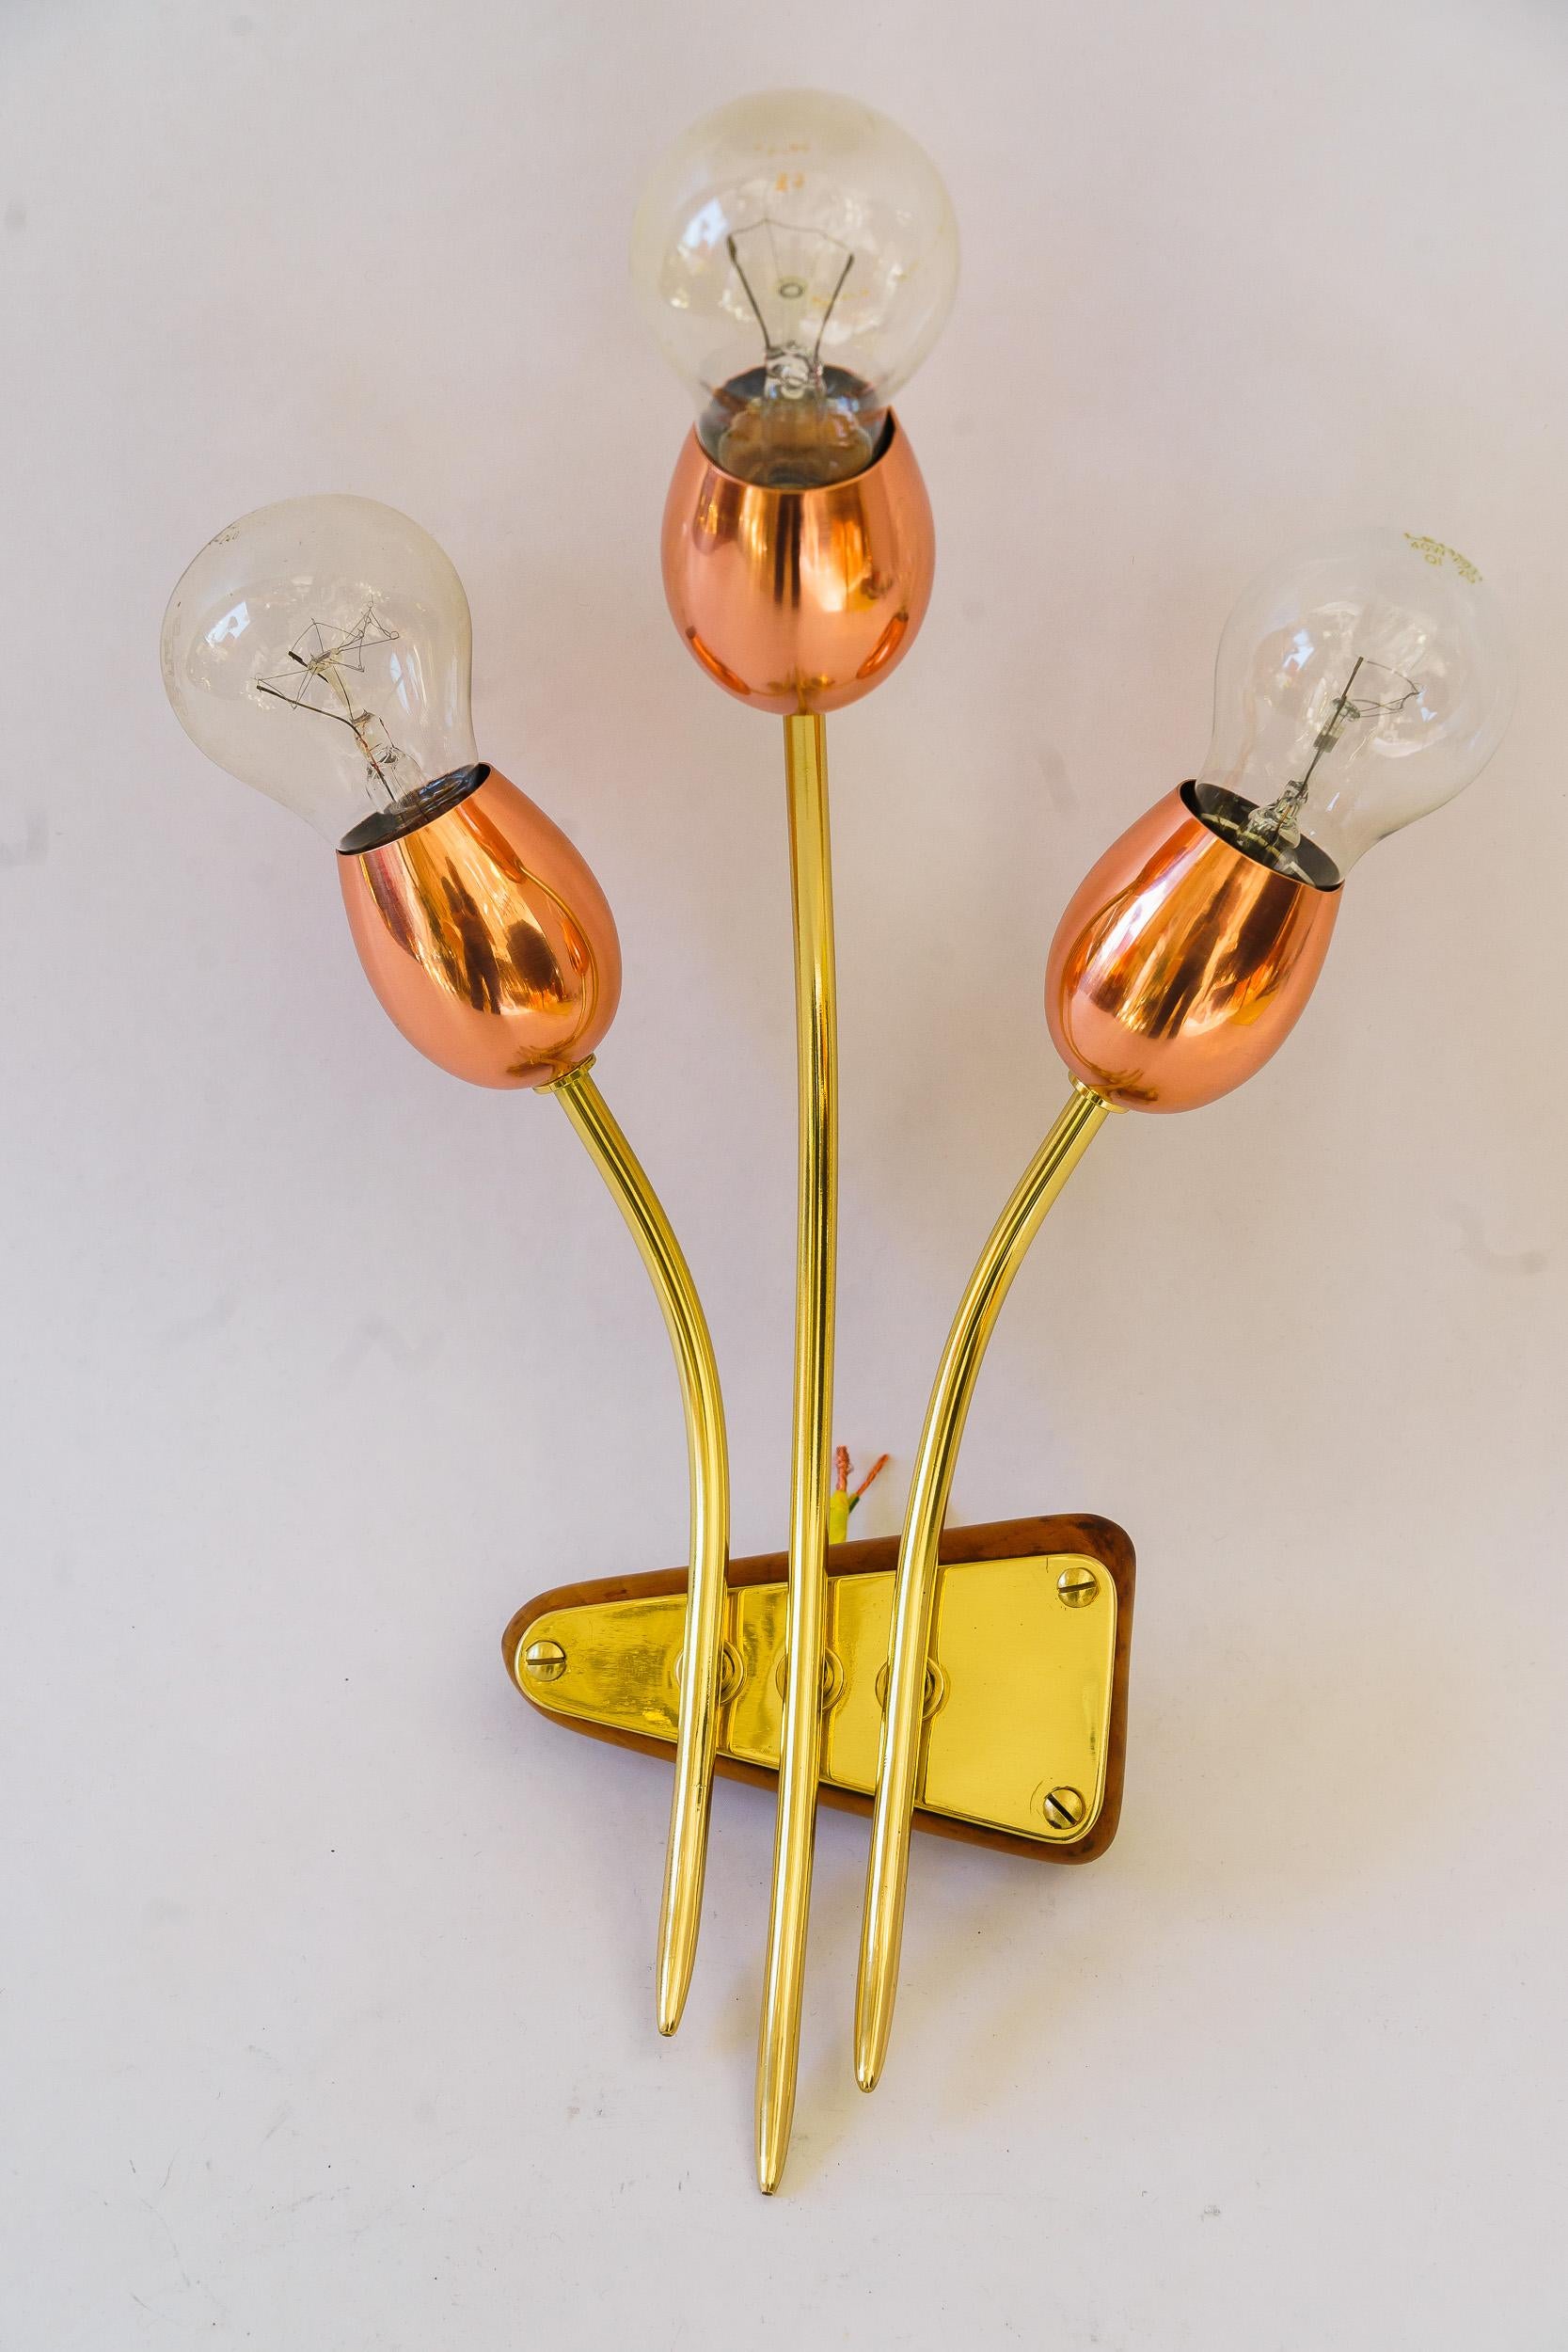 Extraordinary Rupert Nikoll wall lamp vienna around 1950s
Brass and copper polished and stove enameled
